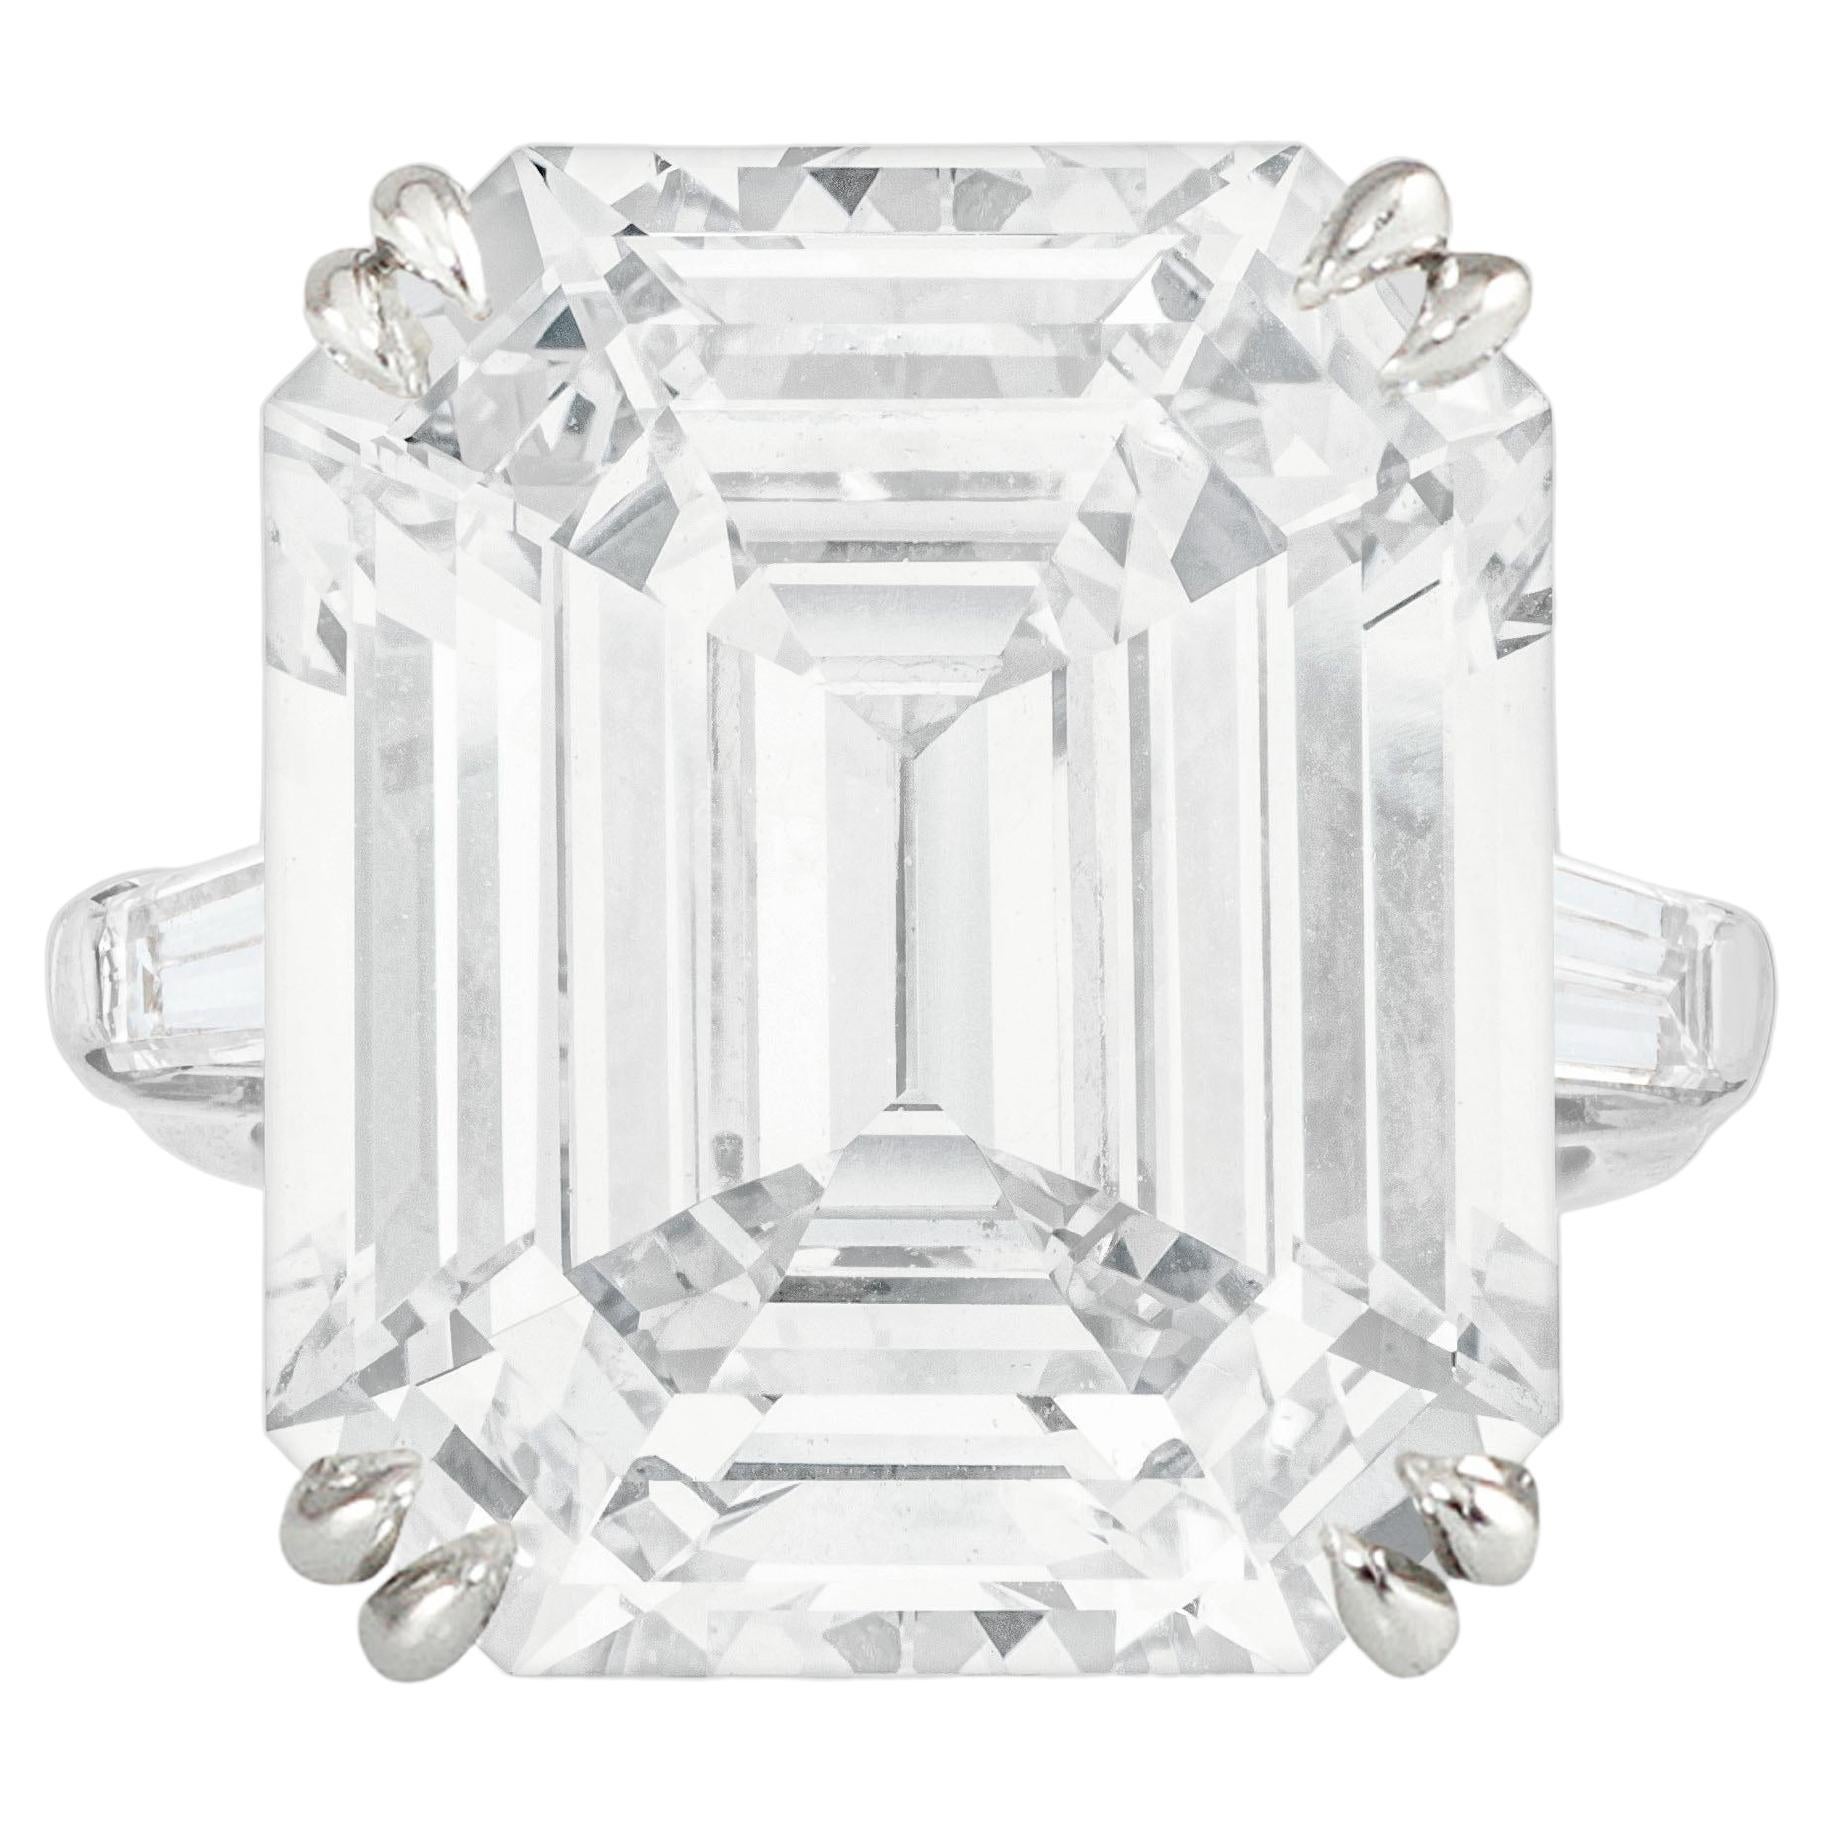 Exceptional Flawless GIA 15 Carat Certified Emerald Cut Diamond Platinum Ring